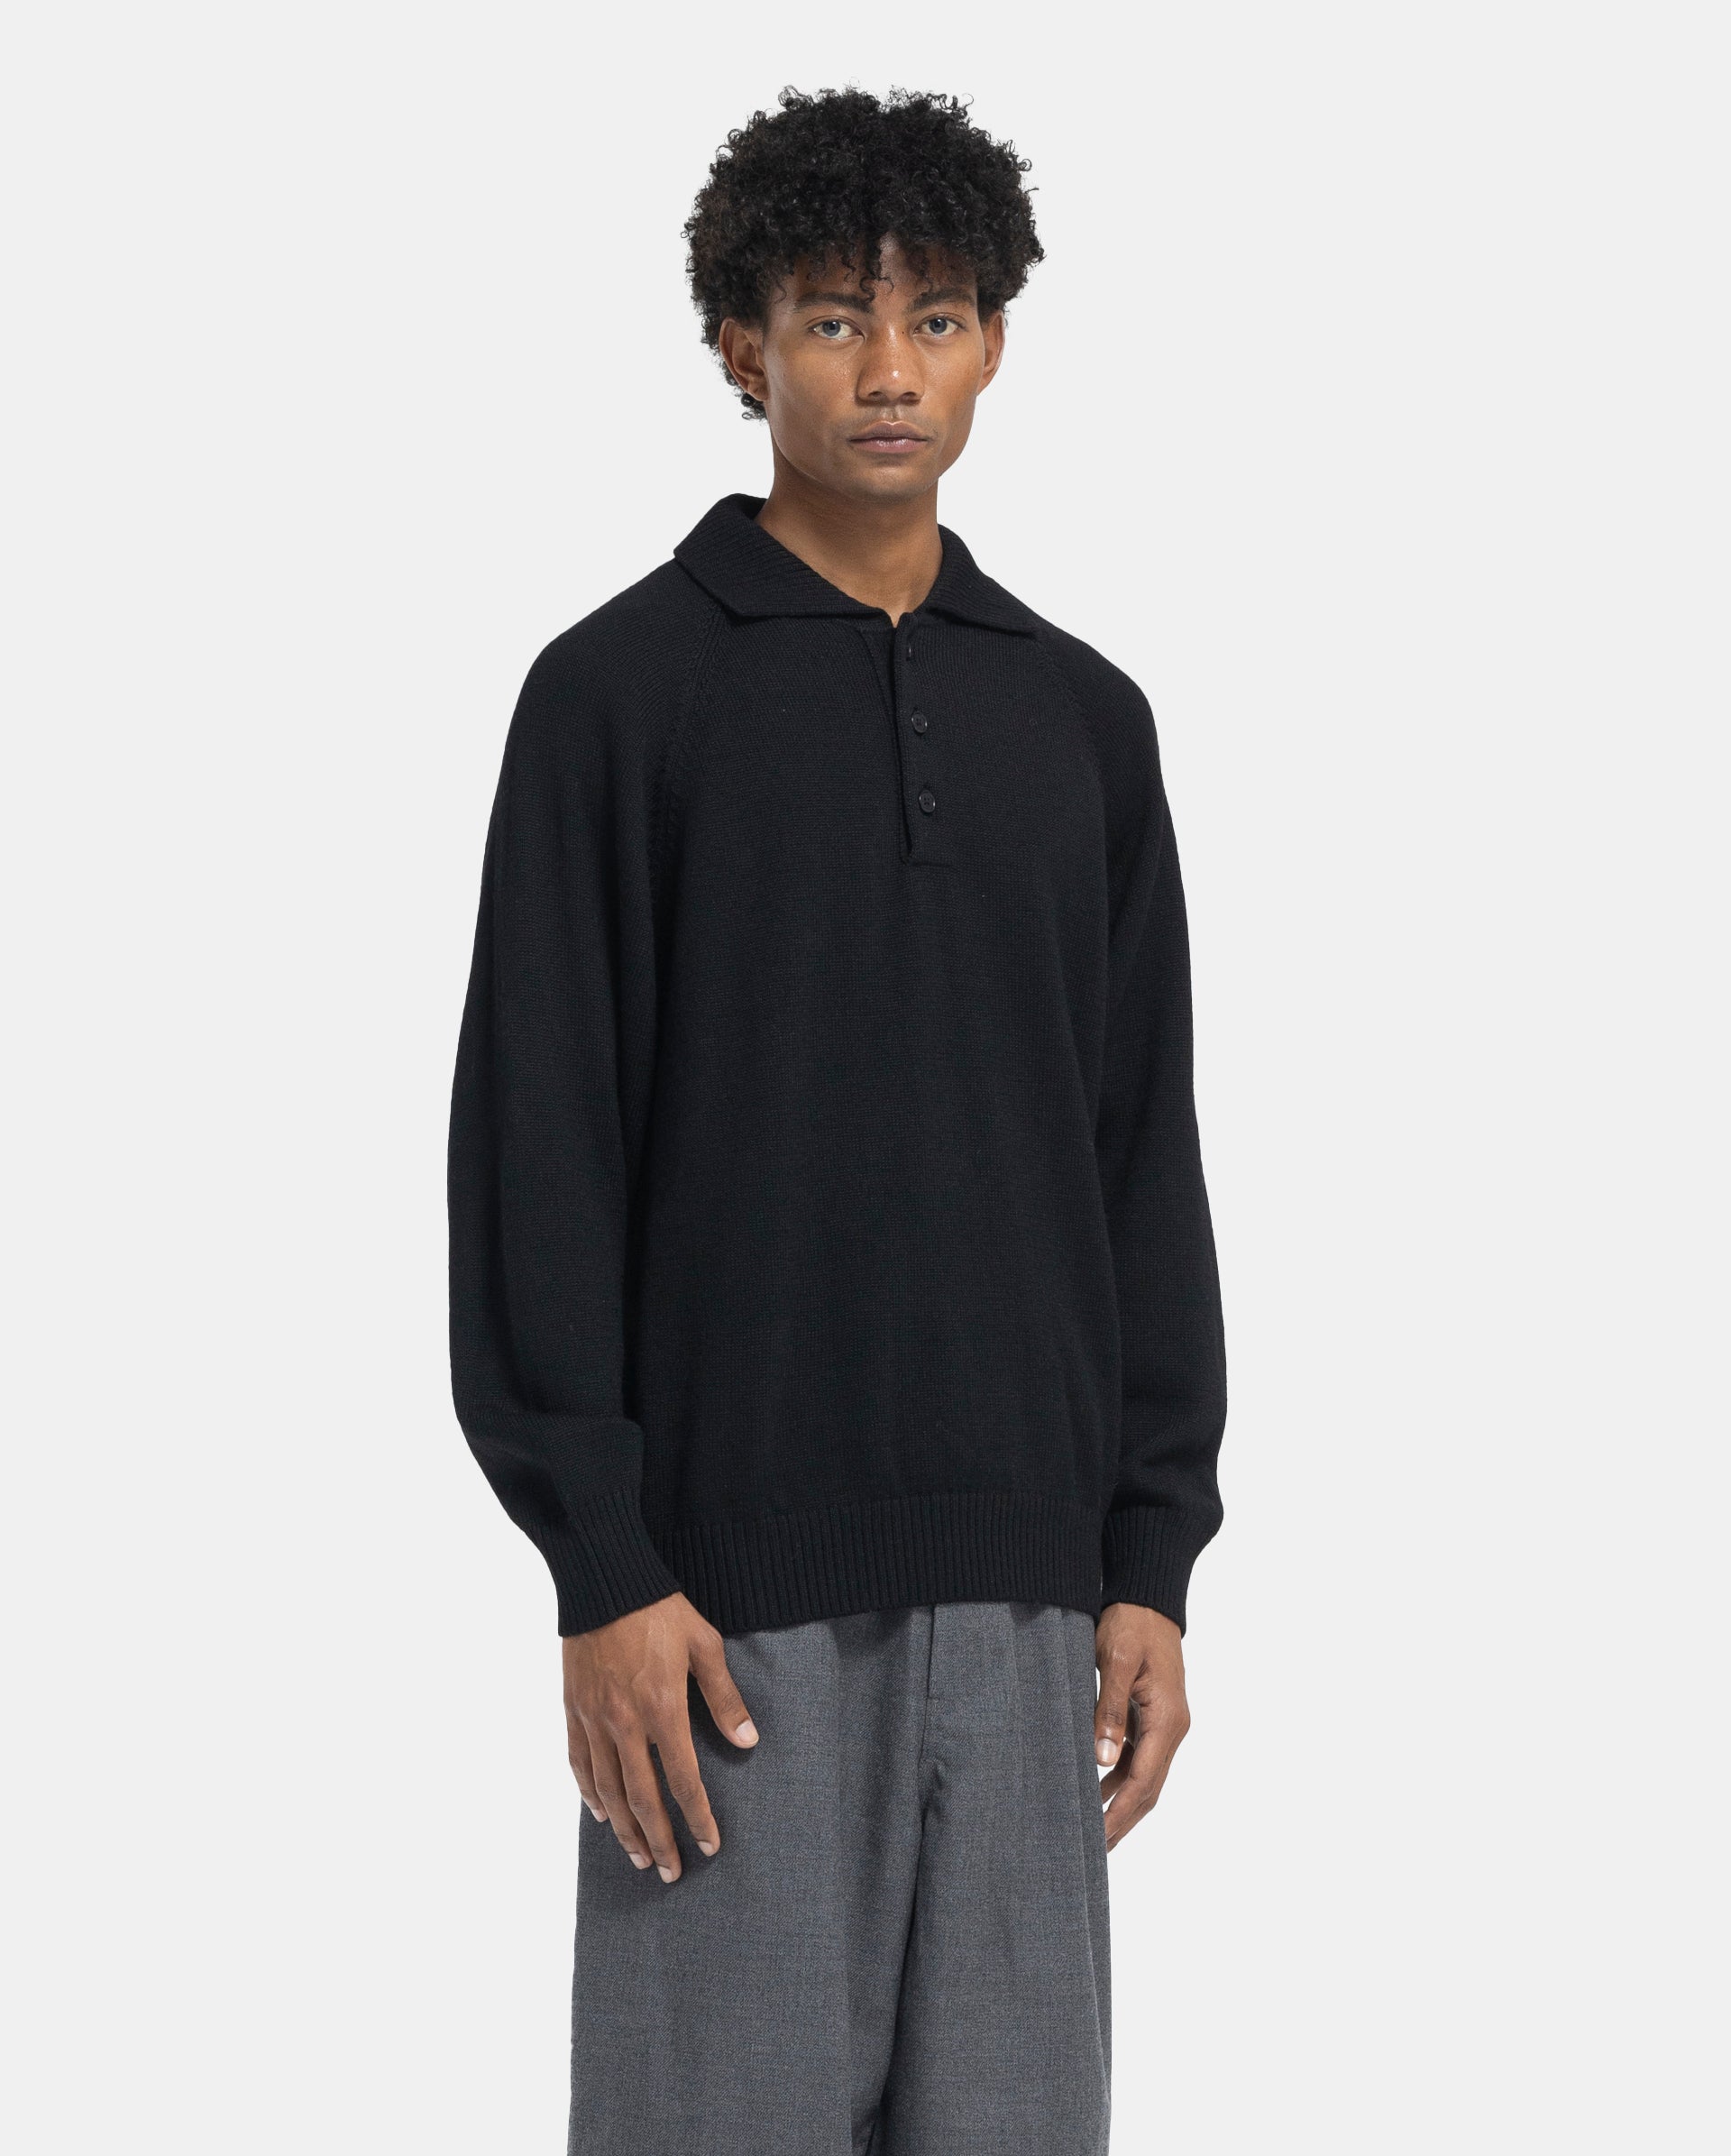 7G Knit Polo in Black